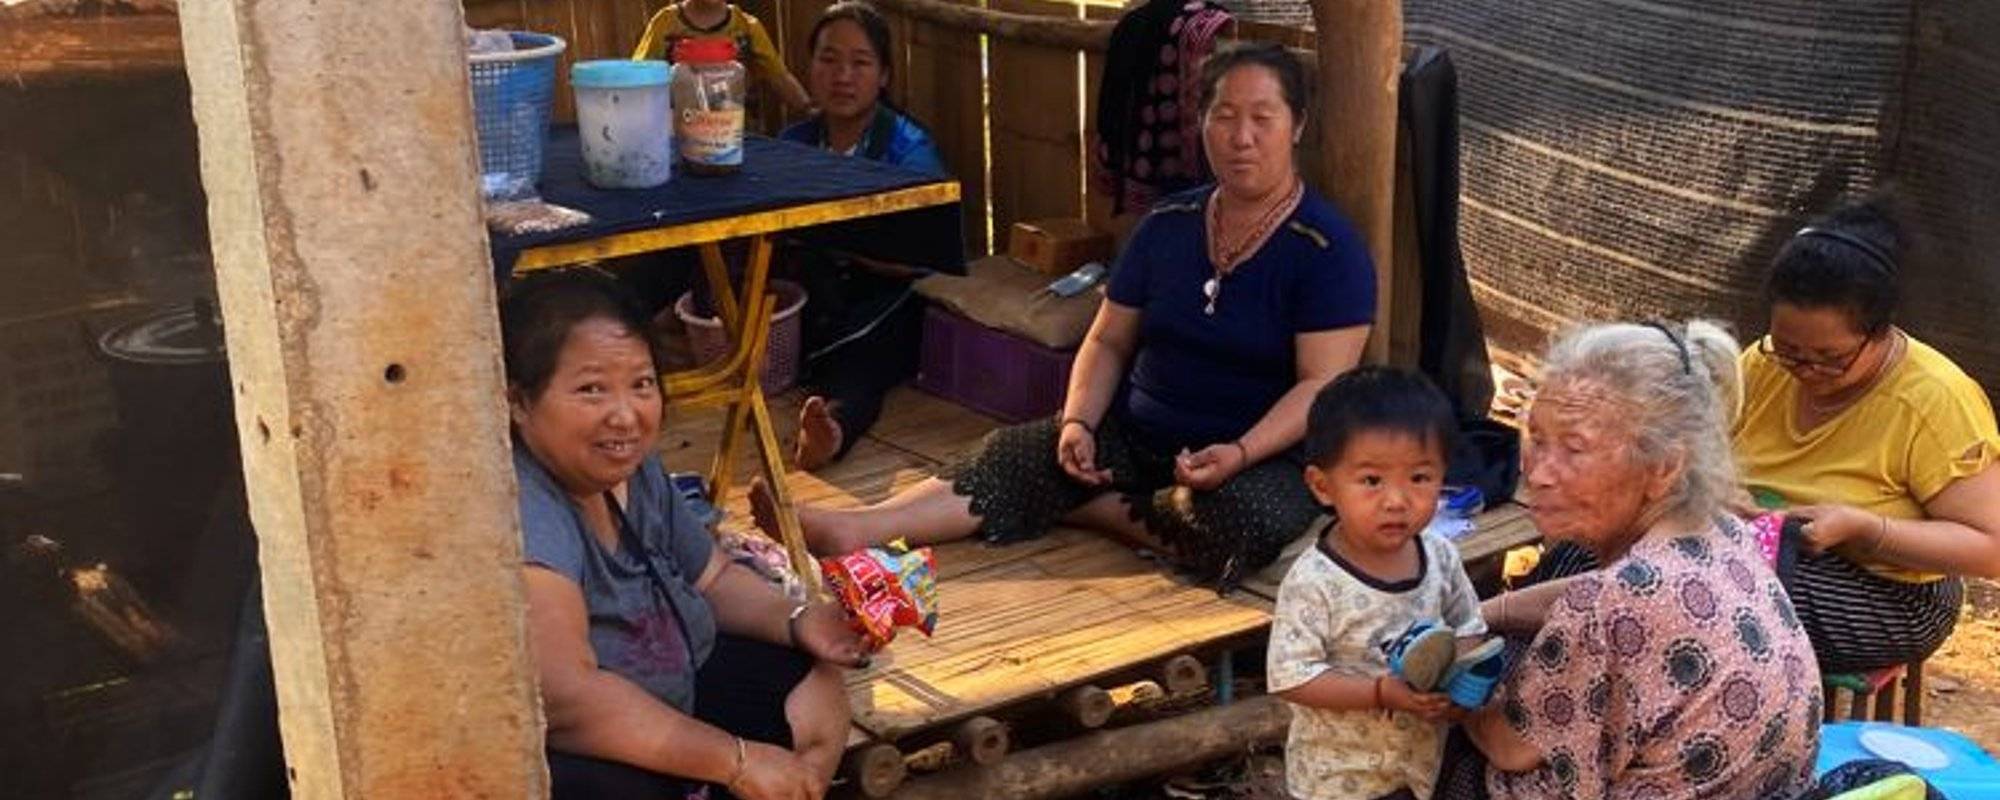 Real Life Captured #371: Hmong Tribal Village in Northern Thailand! Part Eight (9 photos)